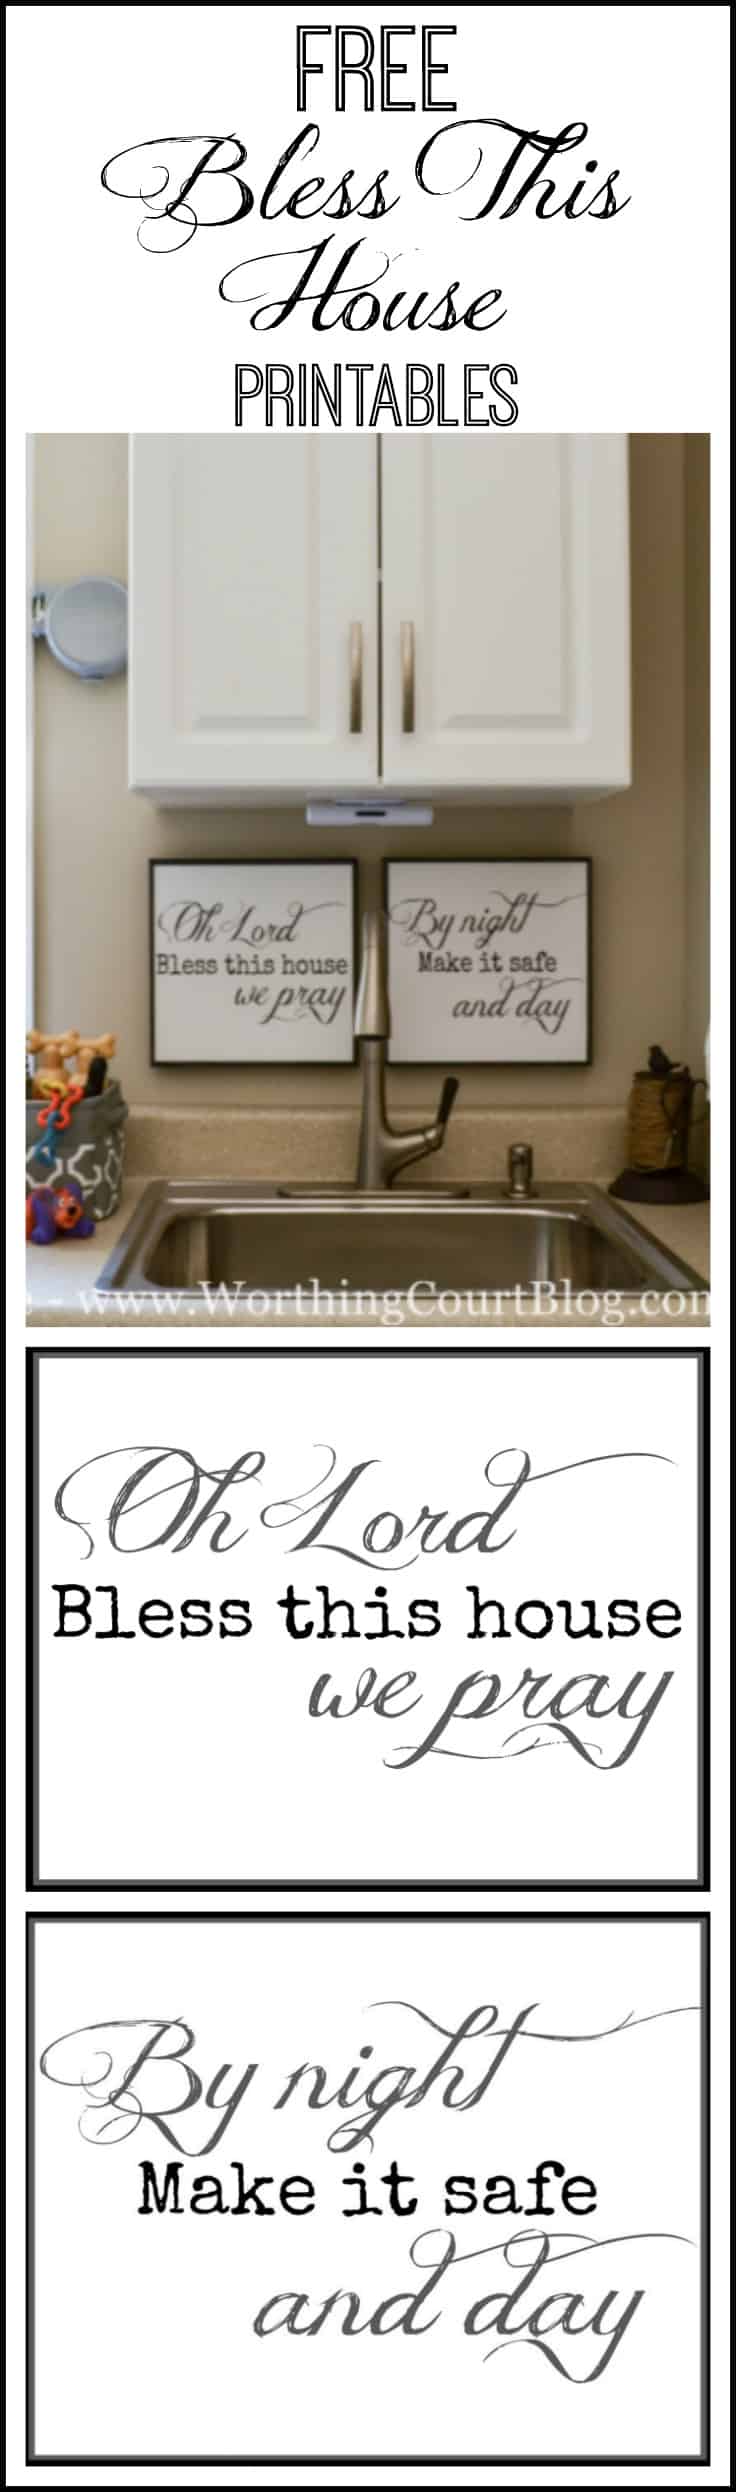 Free "Bless This House" Simple Prayer Printables. Available in 8"x10" and 11.5" square sizes.